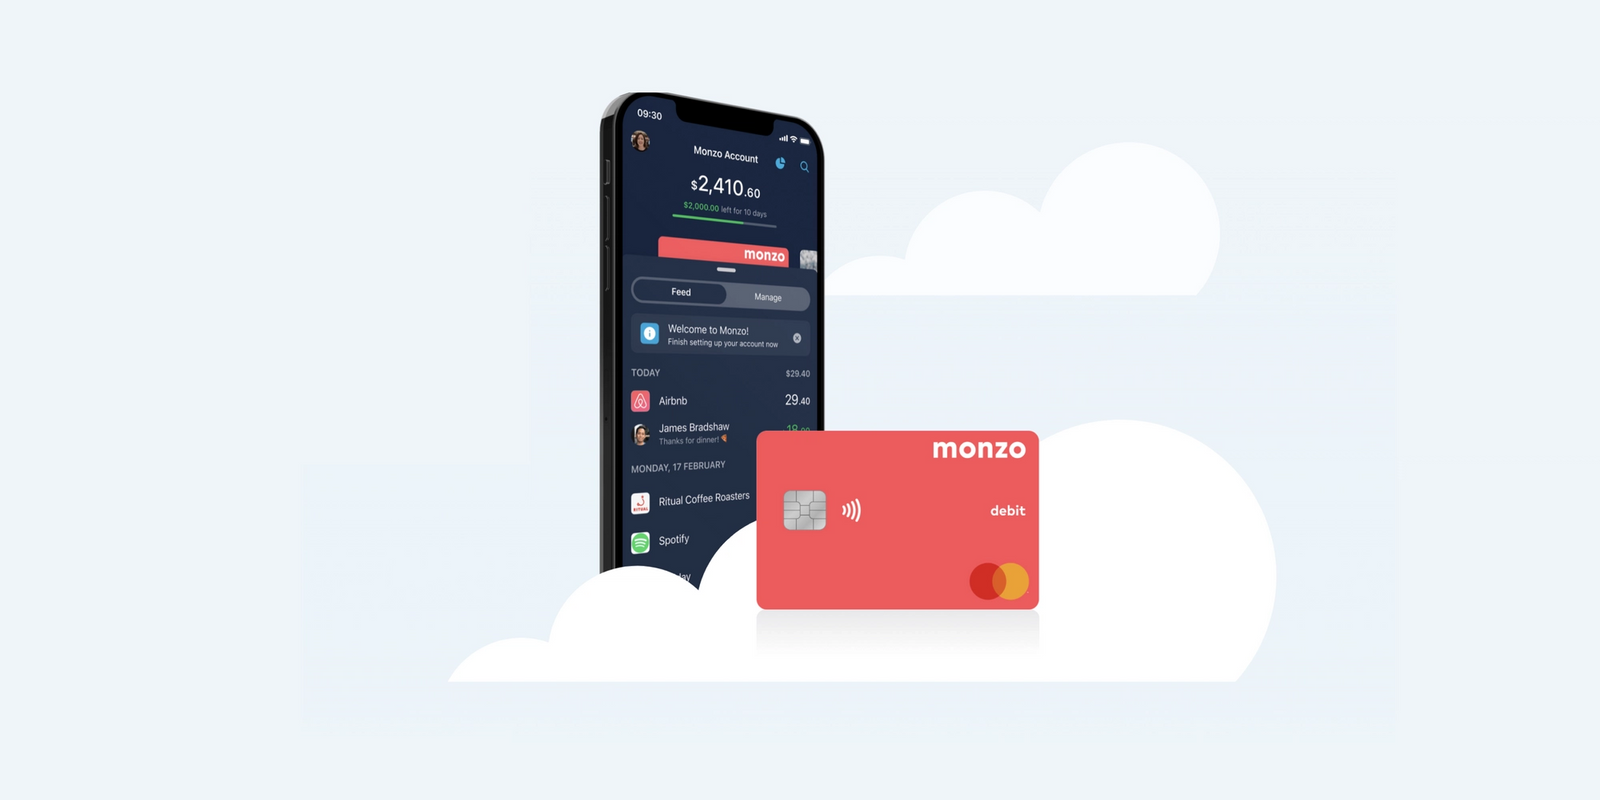 Illustration of Monzo card & mobile app floating in clouds